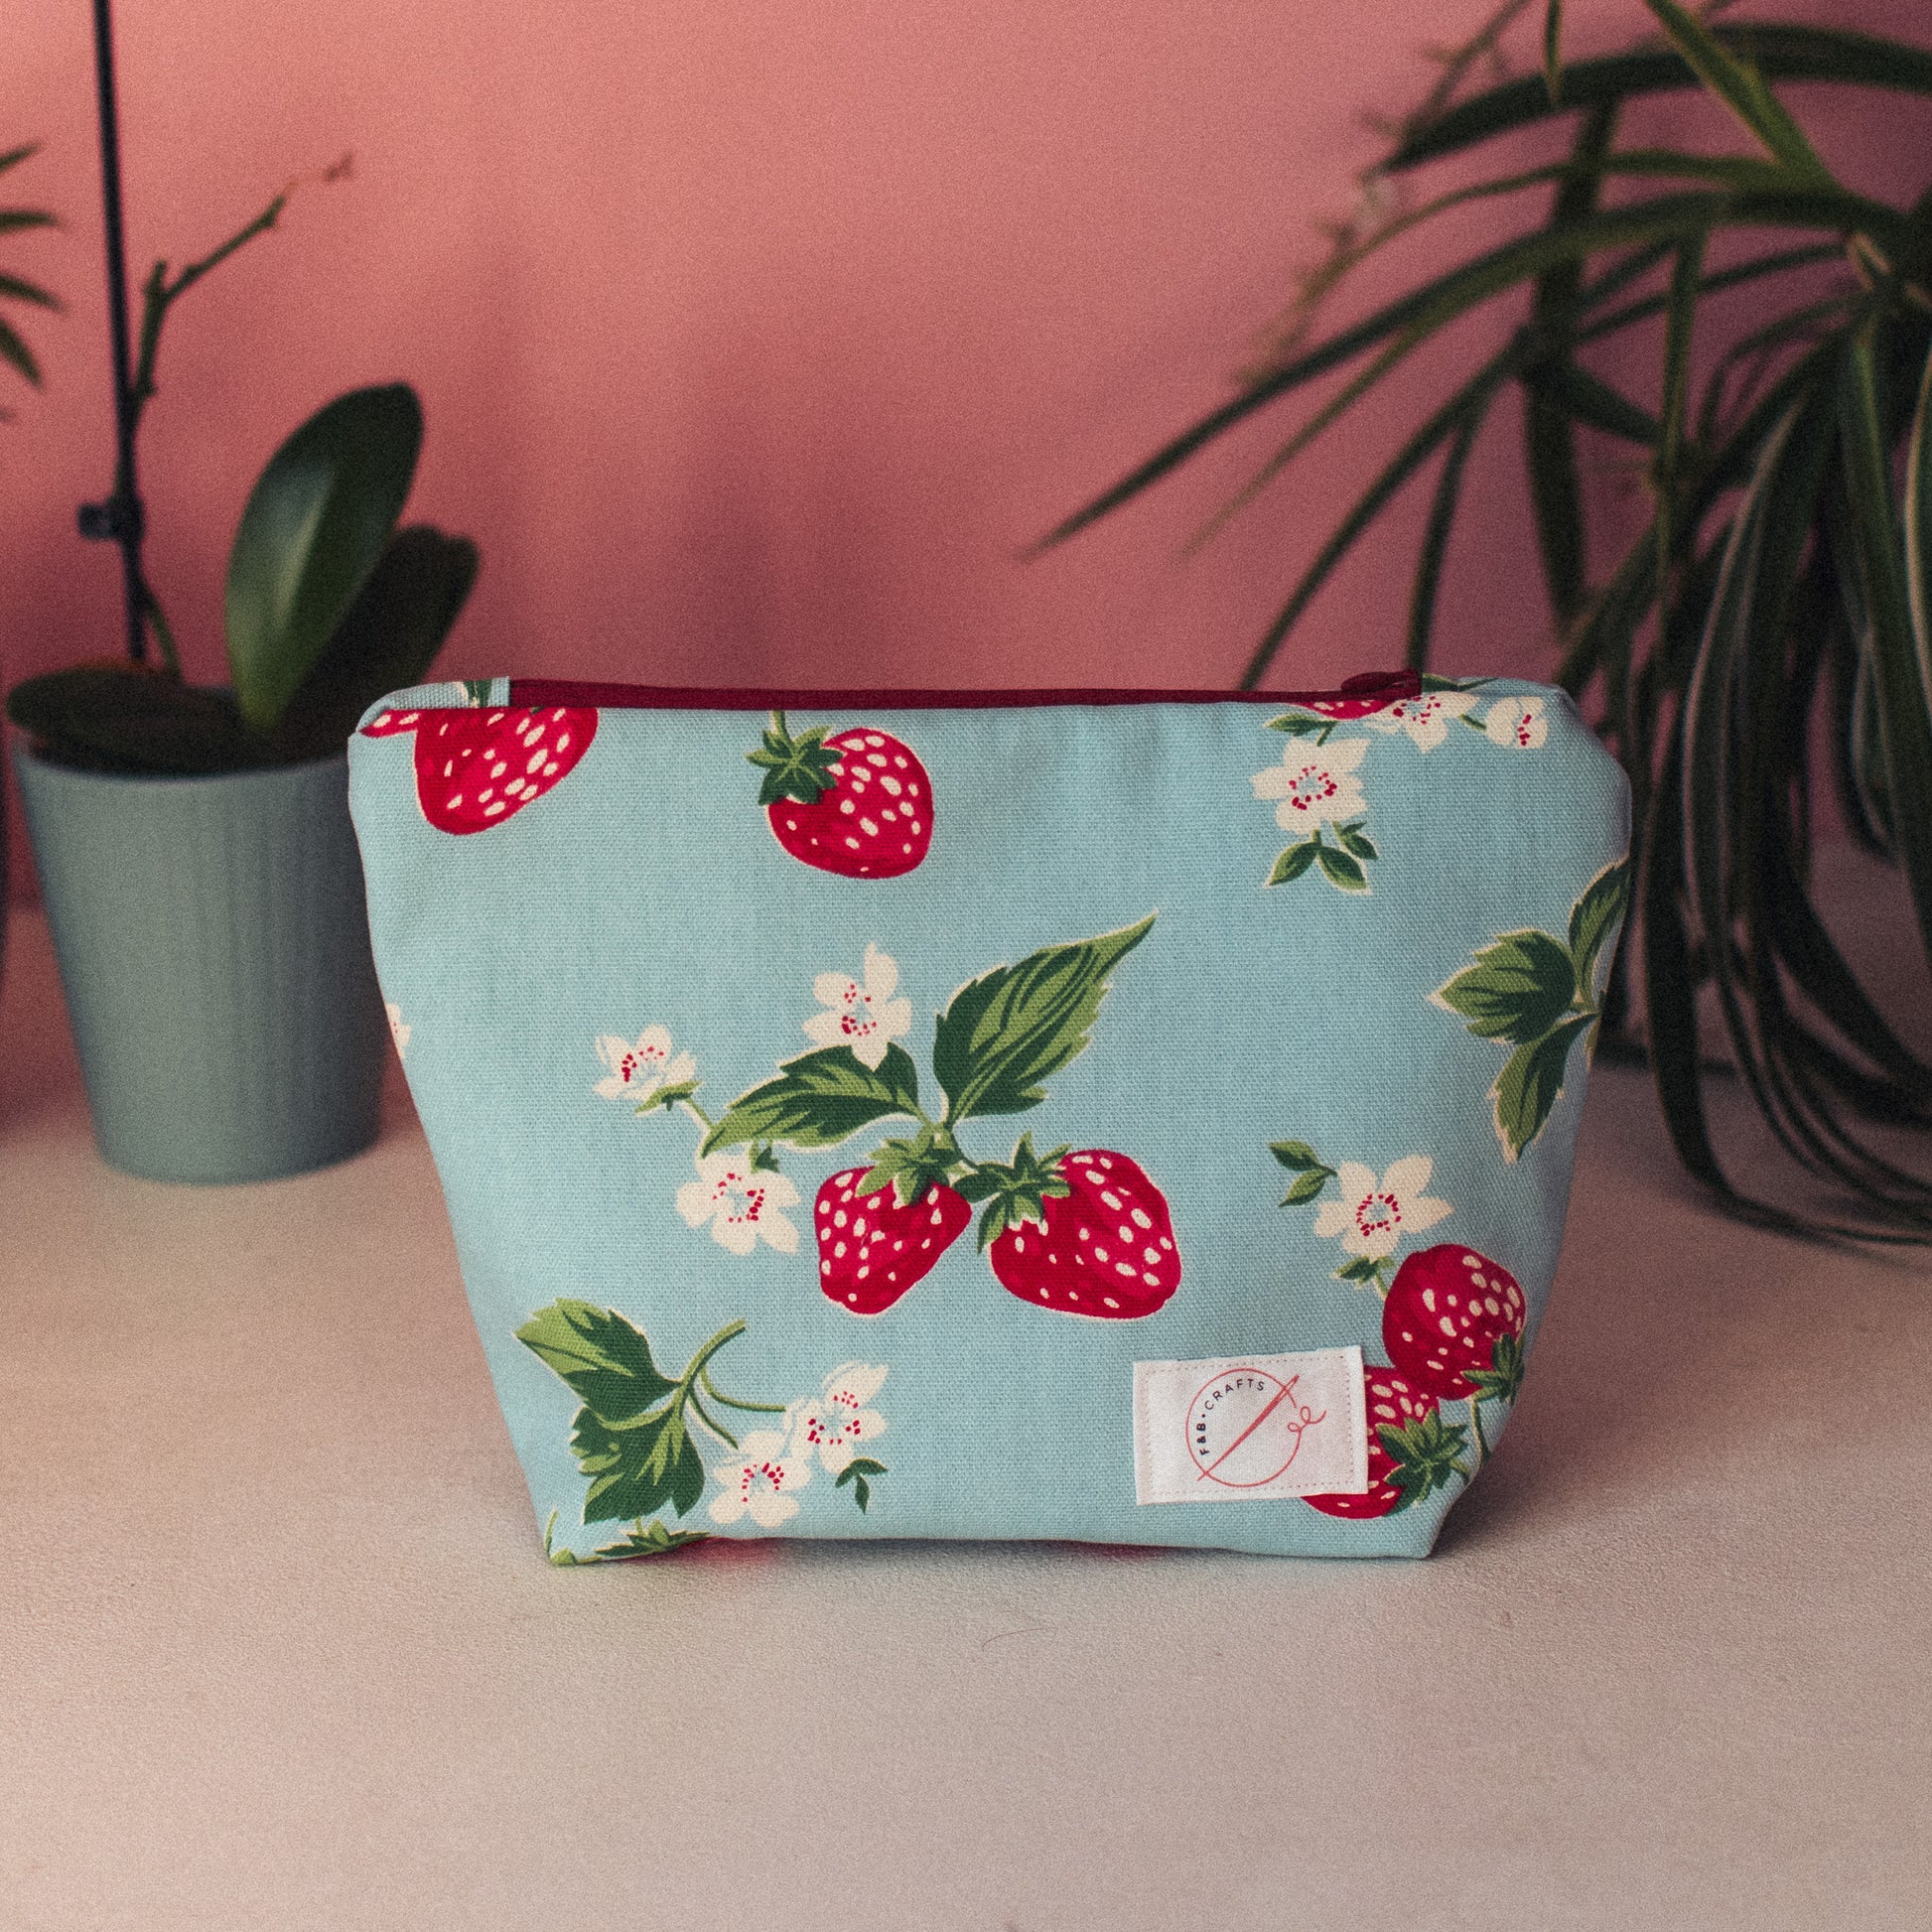 Small Strawberry Cath Kidston Wash Bag with Waterproof Lining